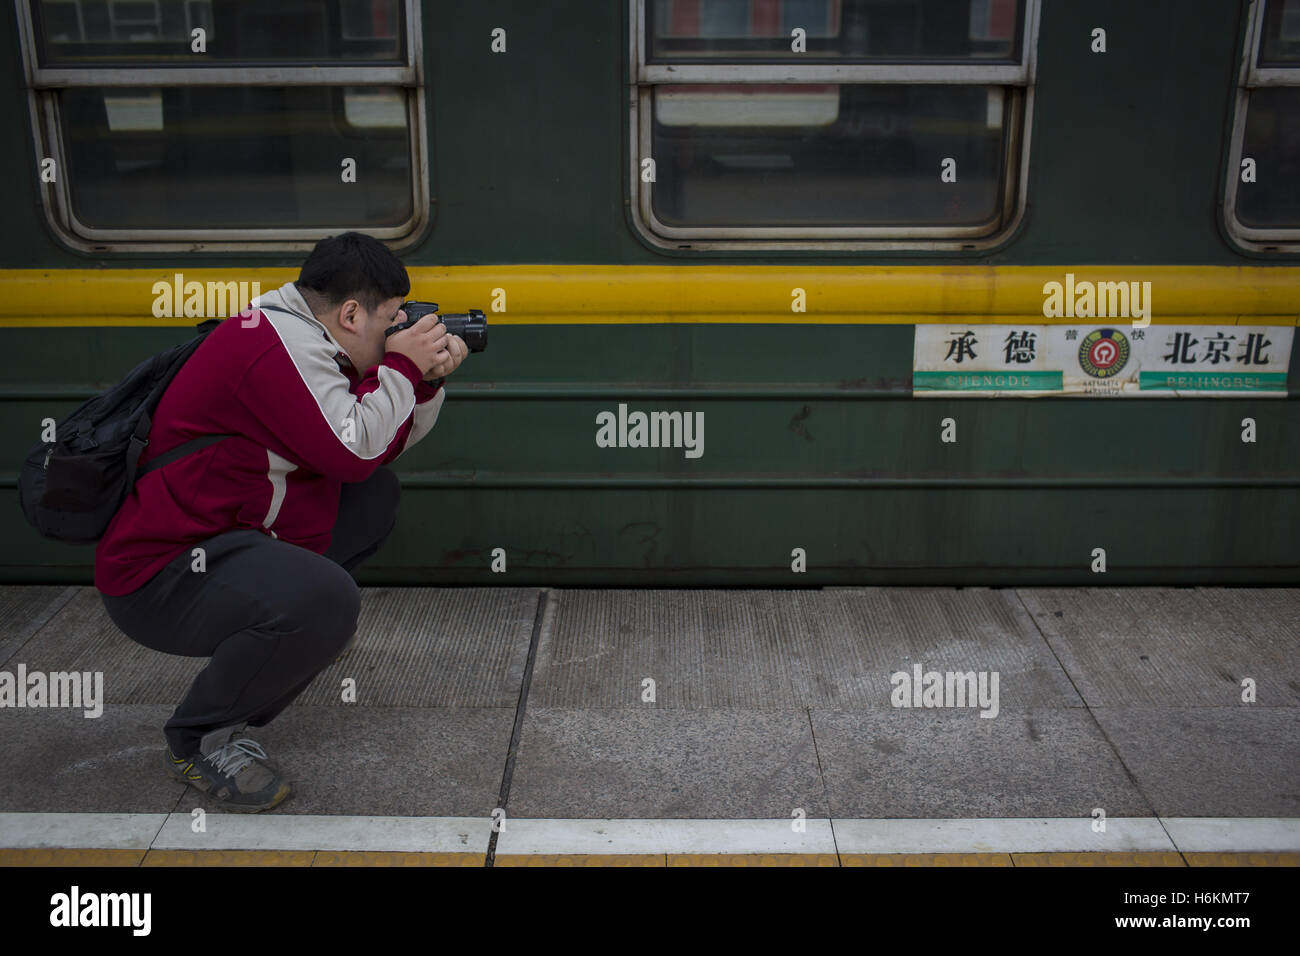 October 27, 2016 - Beijing, china - A man takes photos for the 'green train' at railway station. With China's high-speed rail industry booming around the world, the nation's ''green trains'' are stepping out of China's railways. The ''green trains'', a traditional nickname for Chinese old style passenger trains, have carriages that are usually painted with green color and yellow stripes. Due to the closing of passenger service in Beijing North Railway Station at the 1st day of November, the ''green train'' with series number 4471/4473 which is one of the last remained ''green trains'' in China Stock Photo